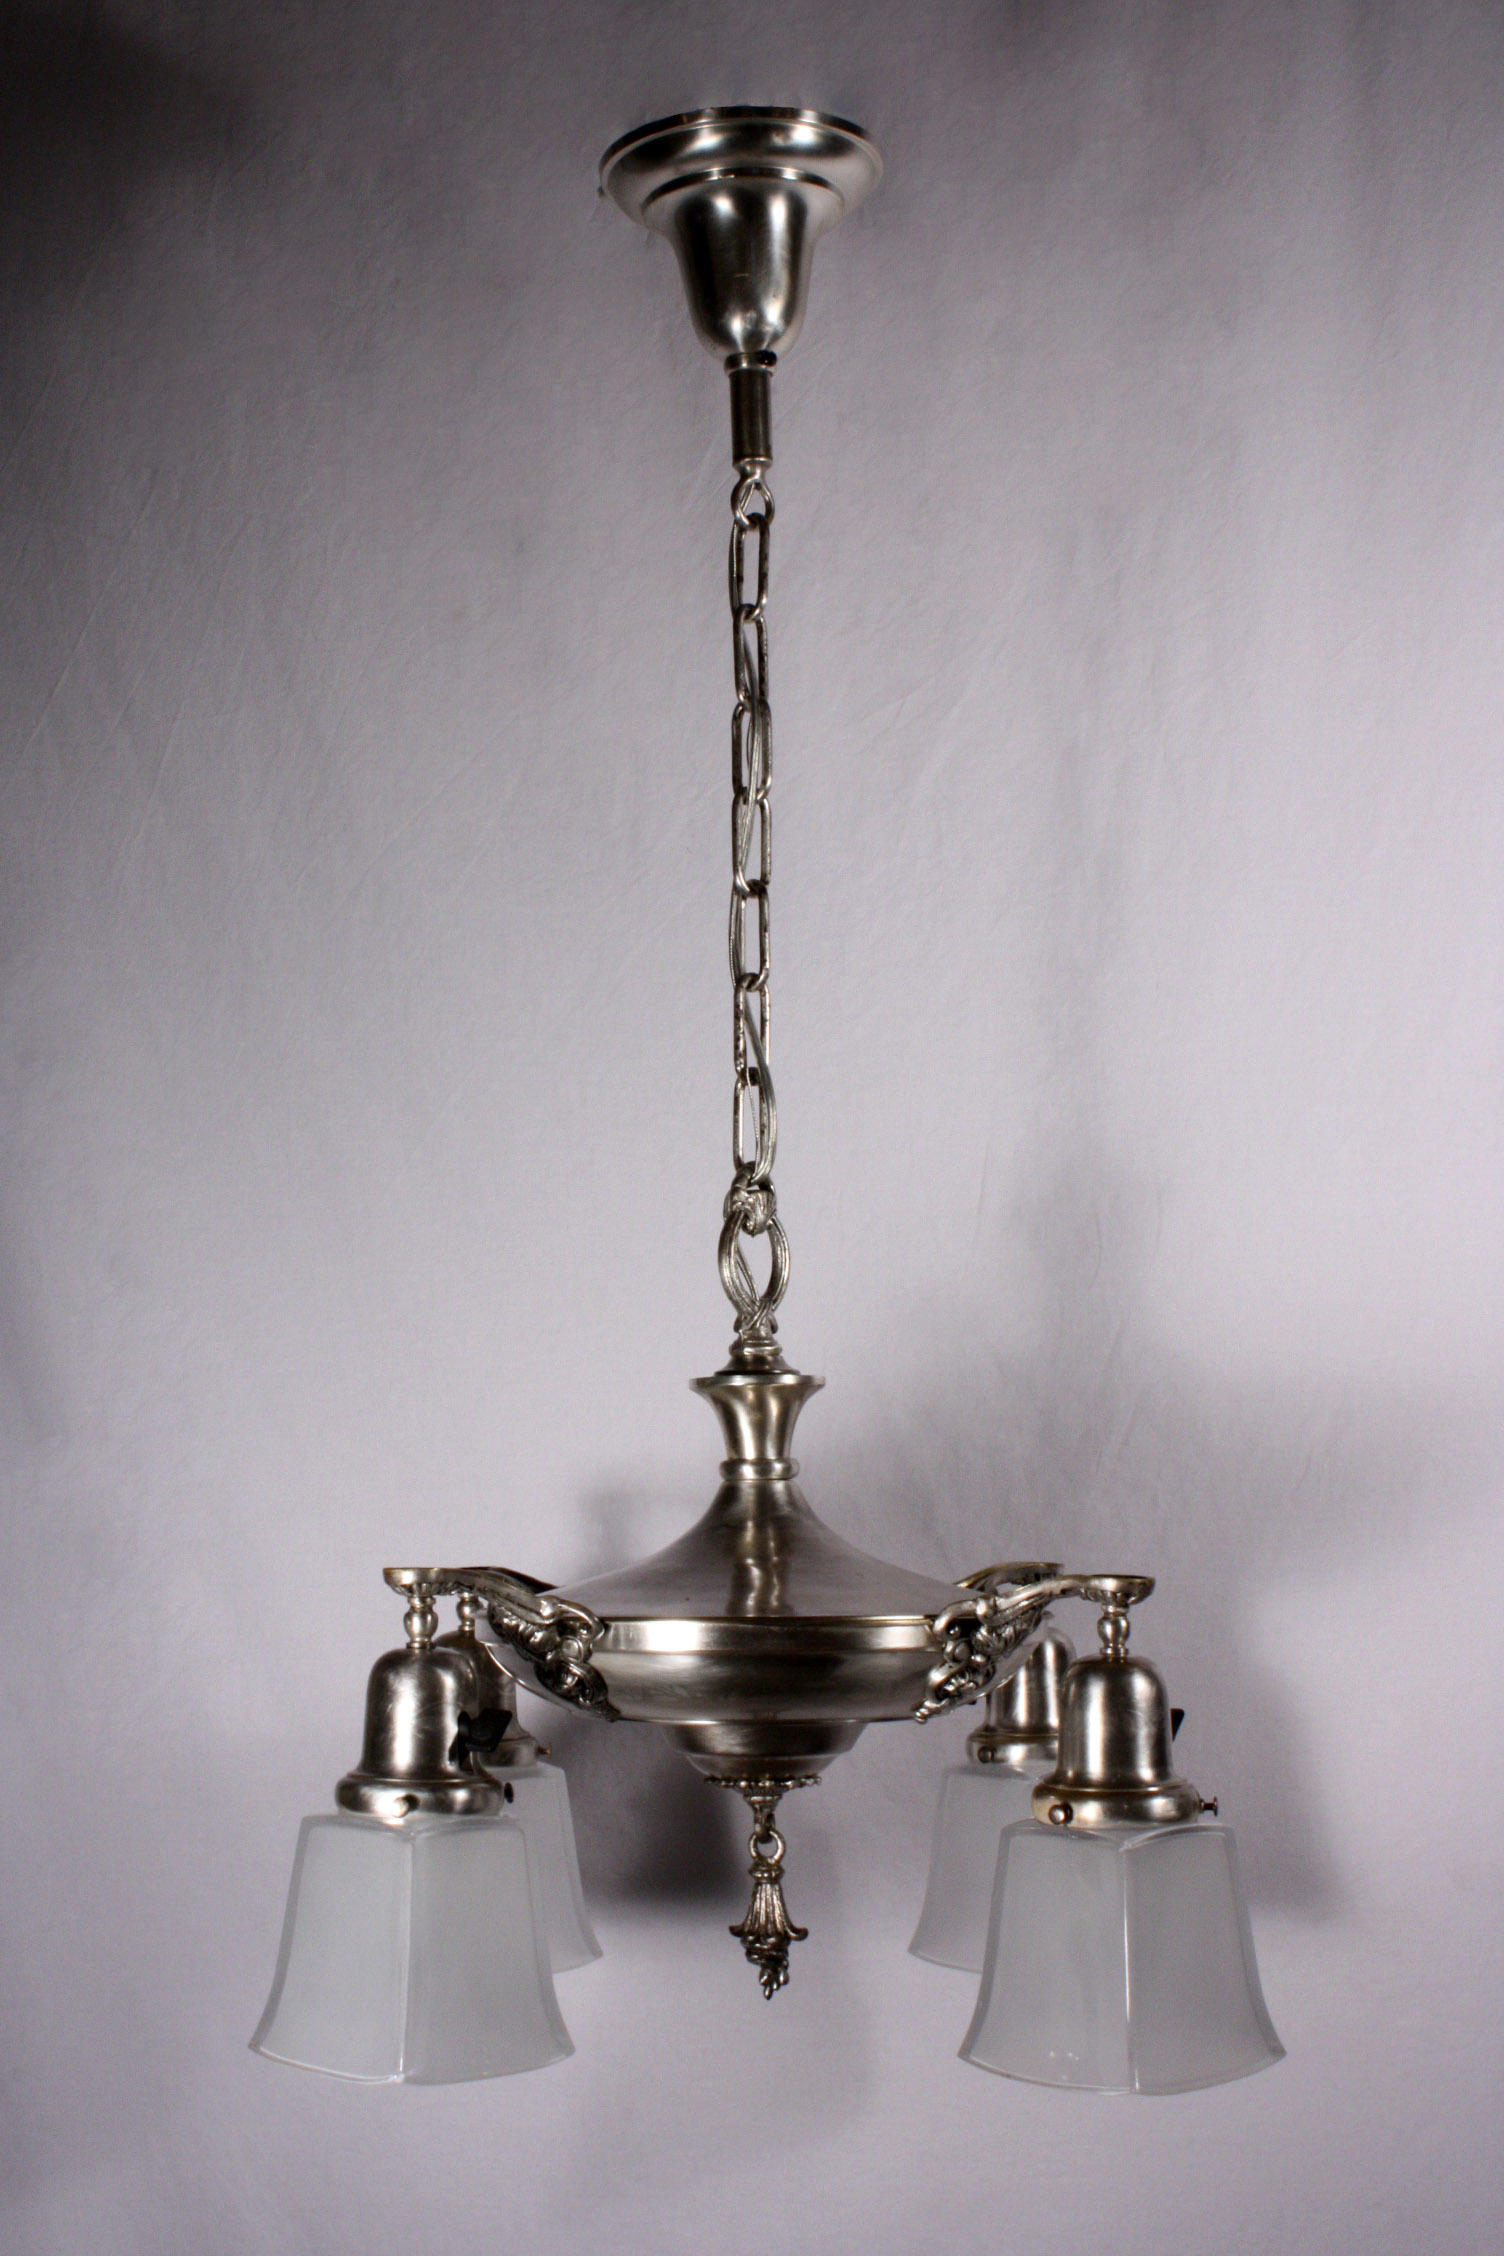 SOLD Gorgeous Antique Four-Arm Silver Plated Chandelier, c. 1910-18685